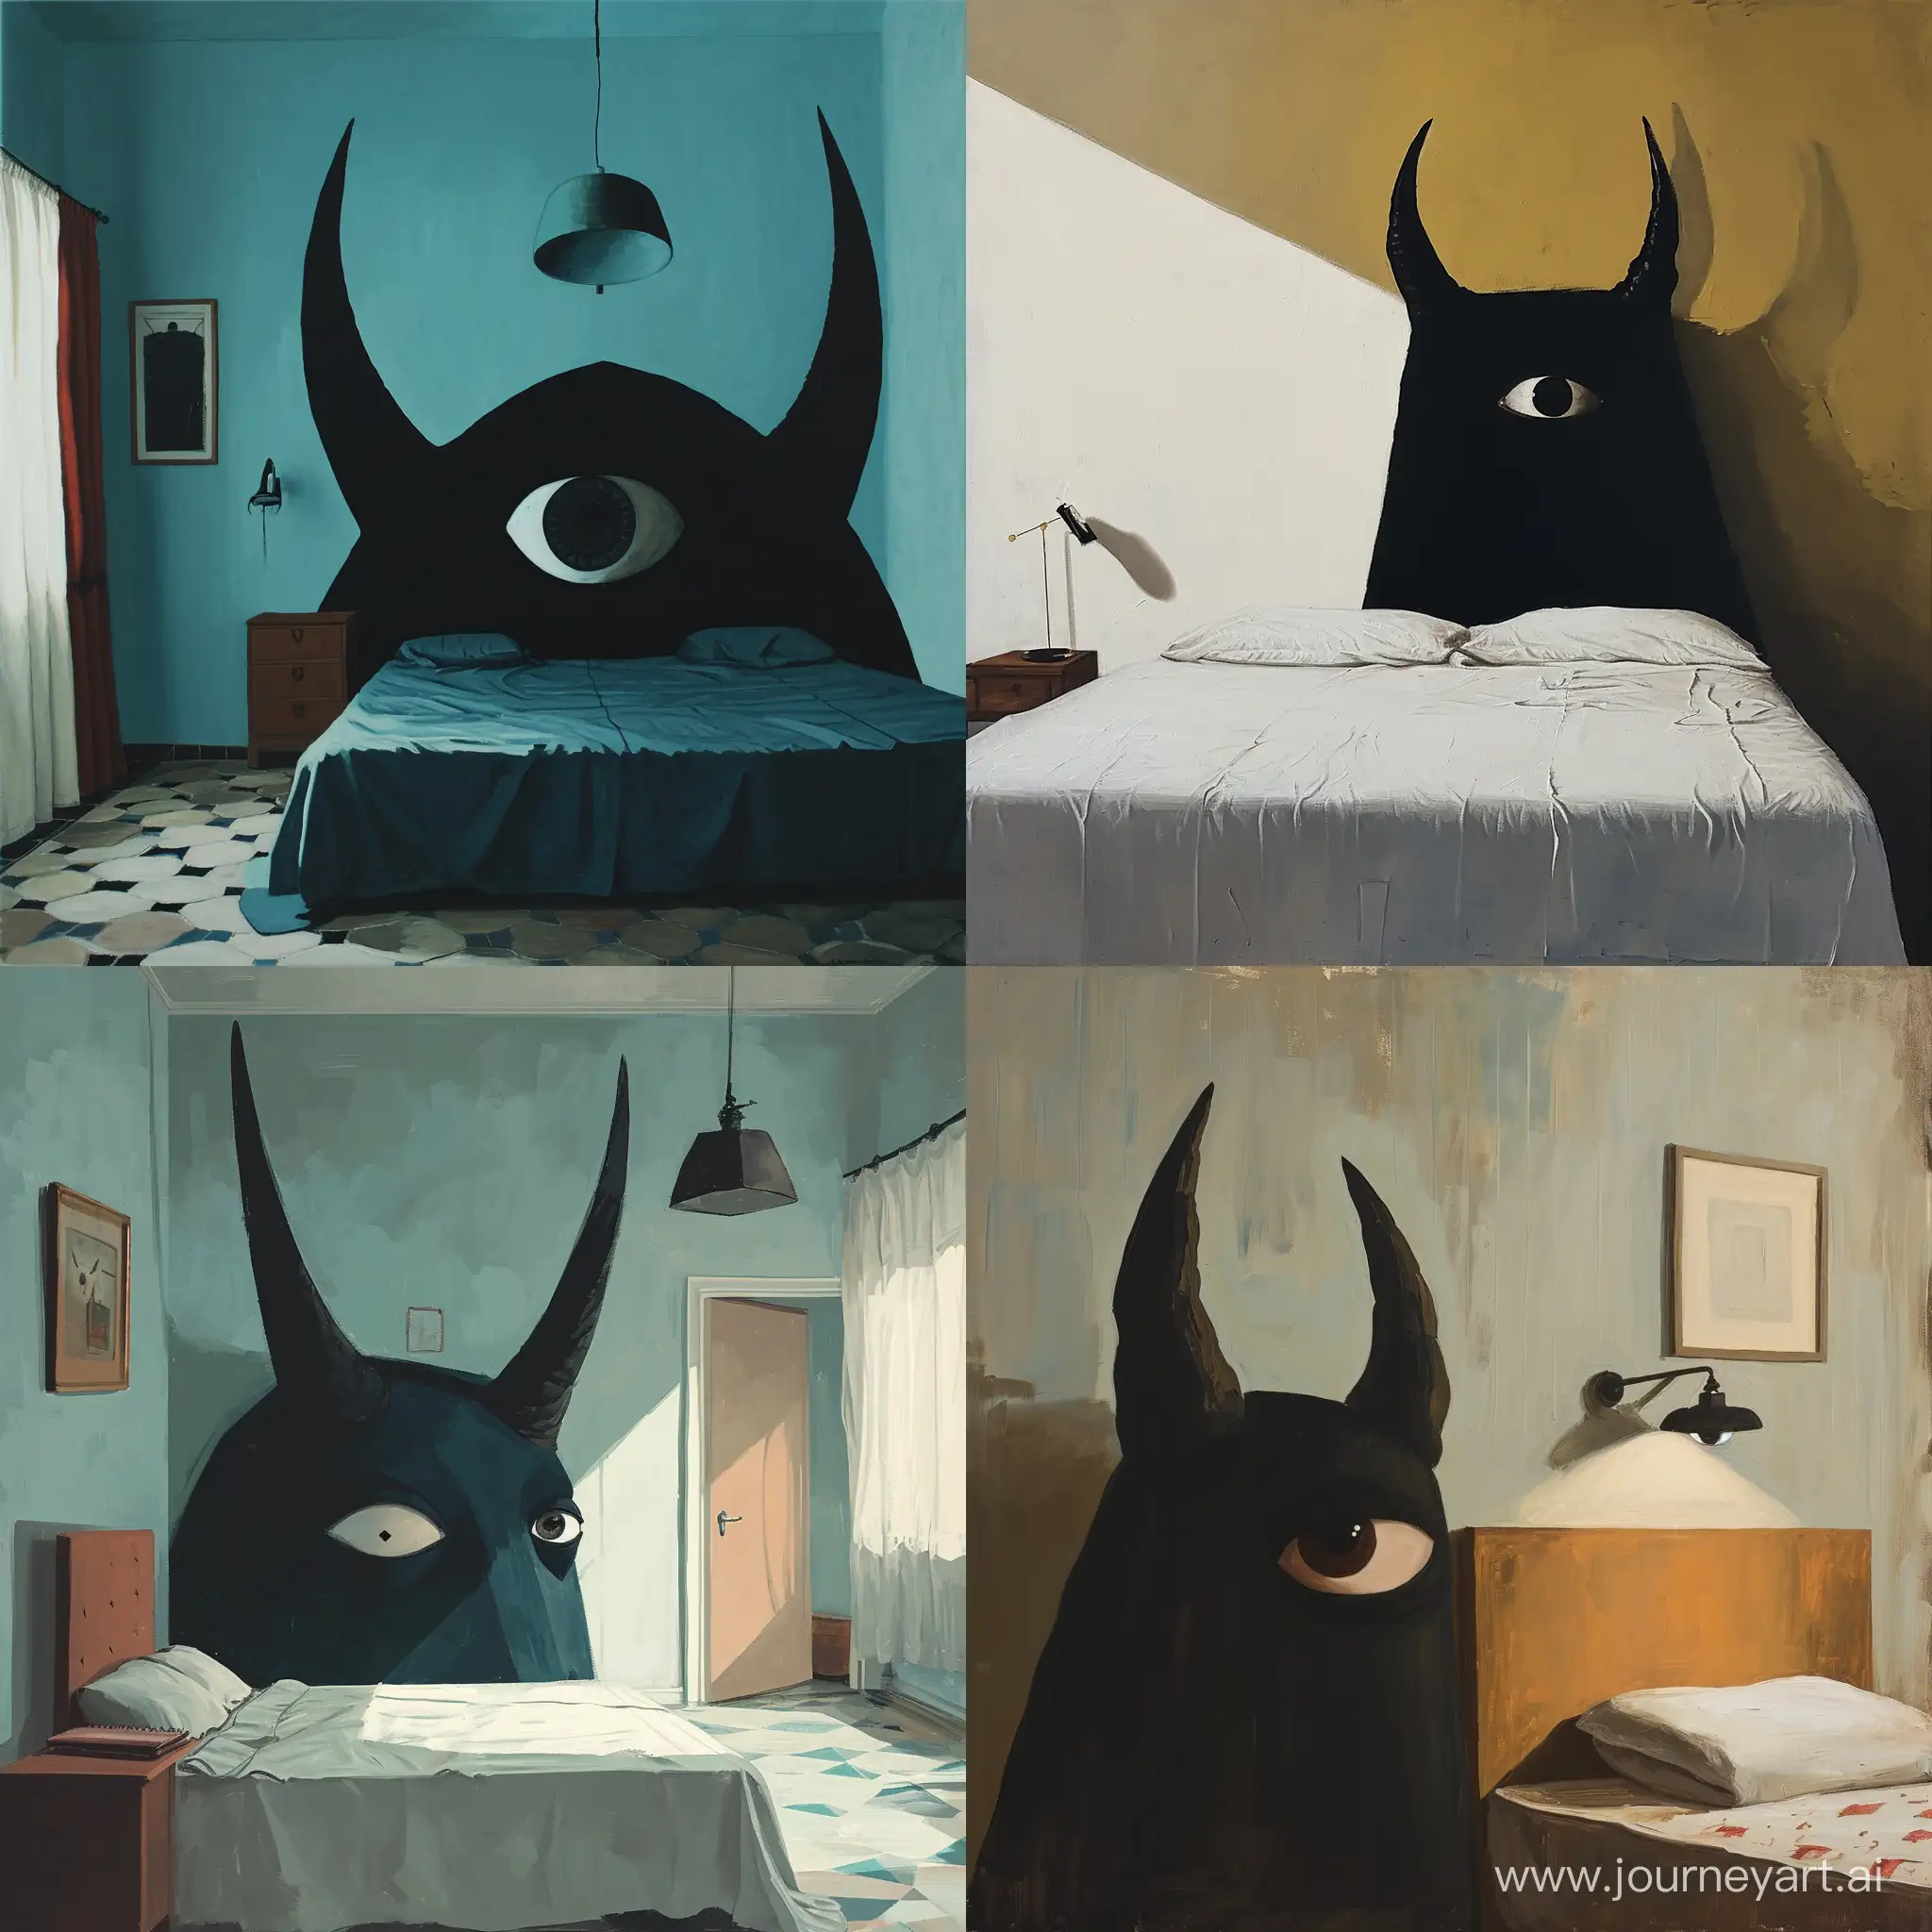 dark horned silhouette in the bedroom with eye, drawn with minimalistic shapes, oil draw like alberto mielgo, realistic colors, light and shadows --v 6